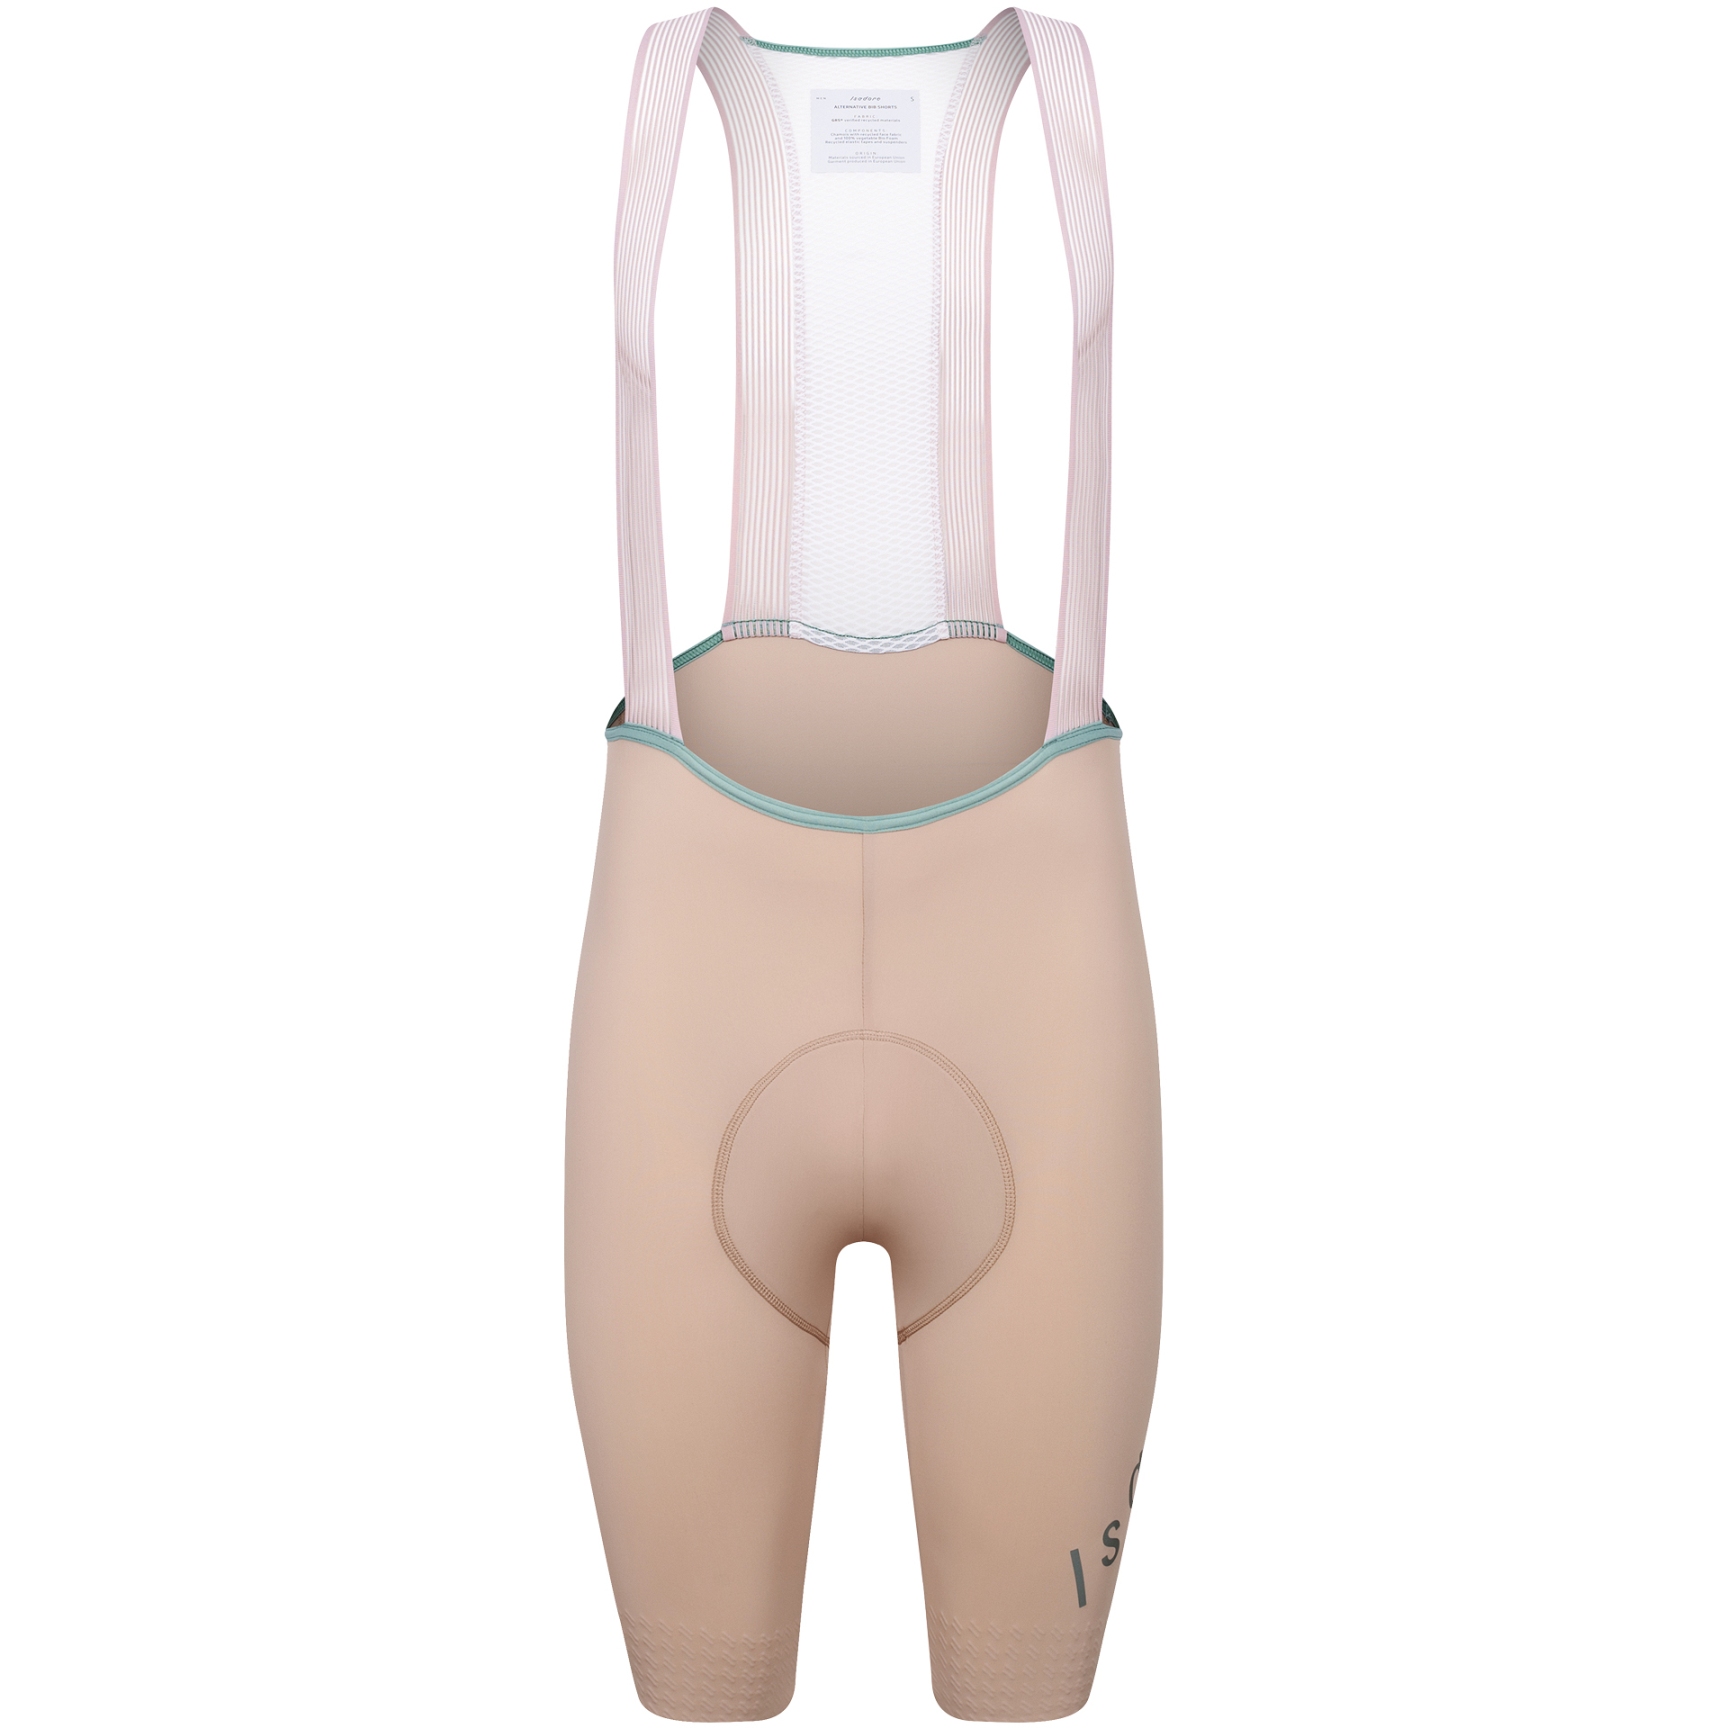 Picture of Isadore Alternative Bib Shorts 2.0 - Roasted Cashew